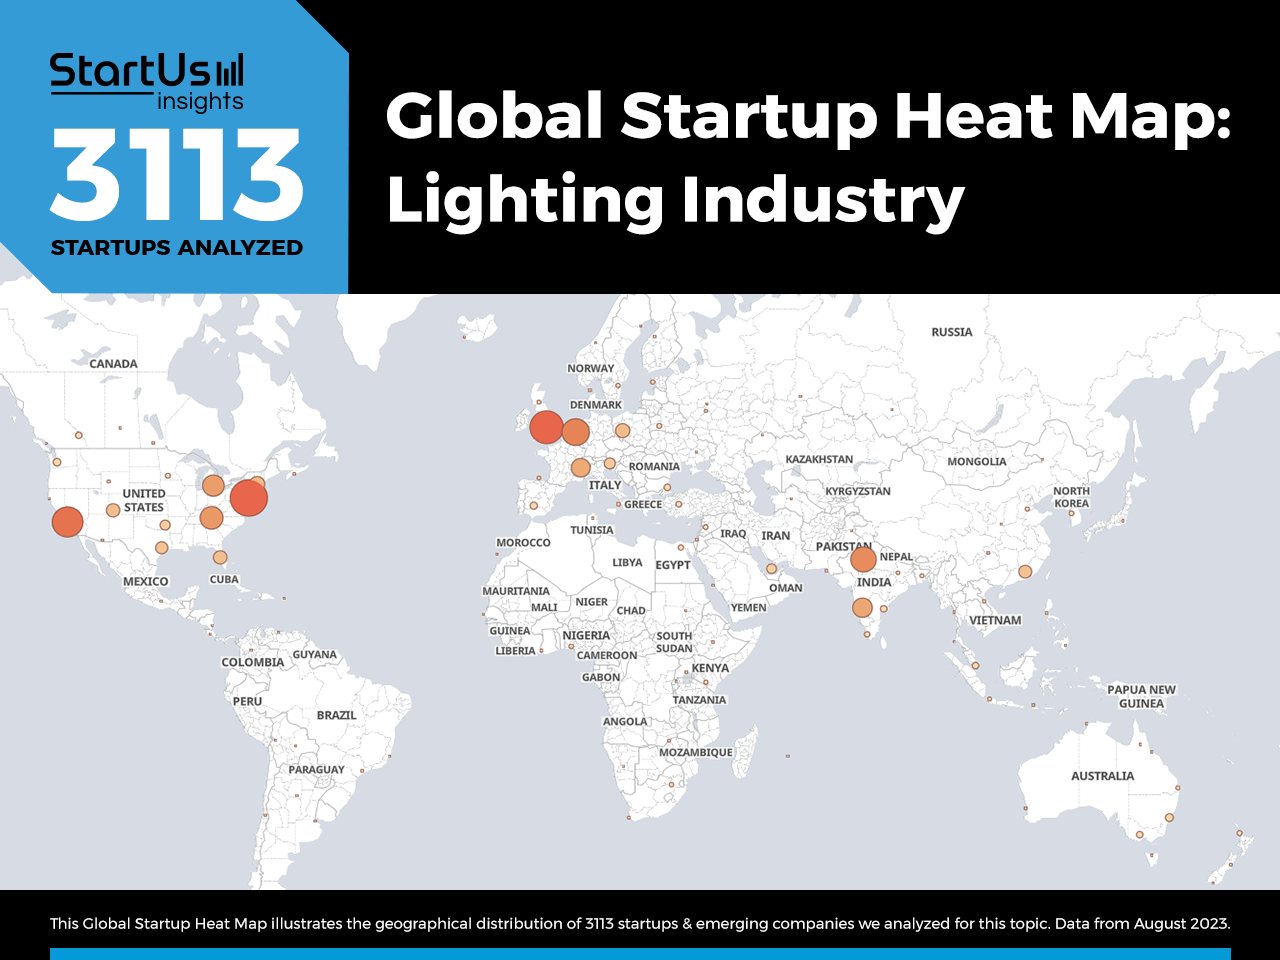 Lighting-Industry-trends-Startups-TrendResearch-Heat-Map-StartUs-Insights-noresize